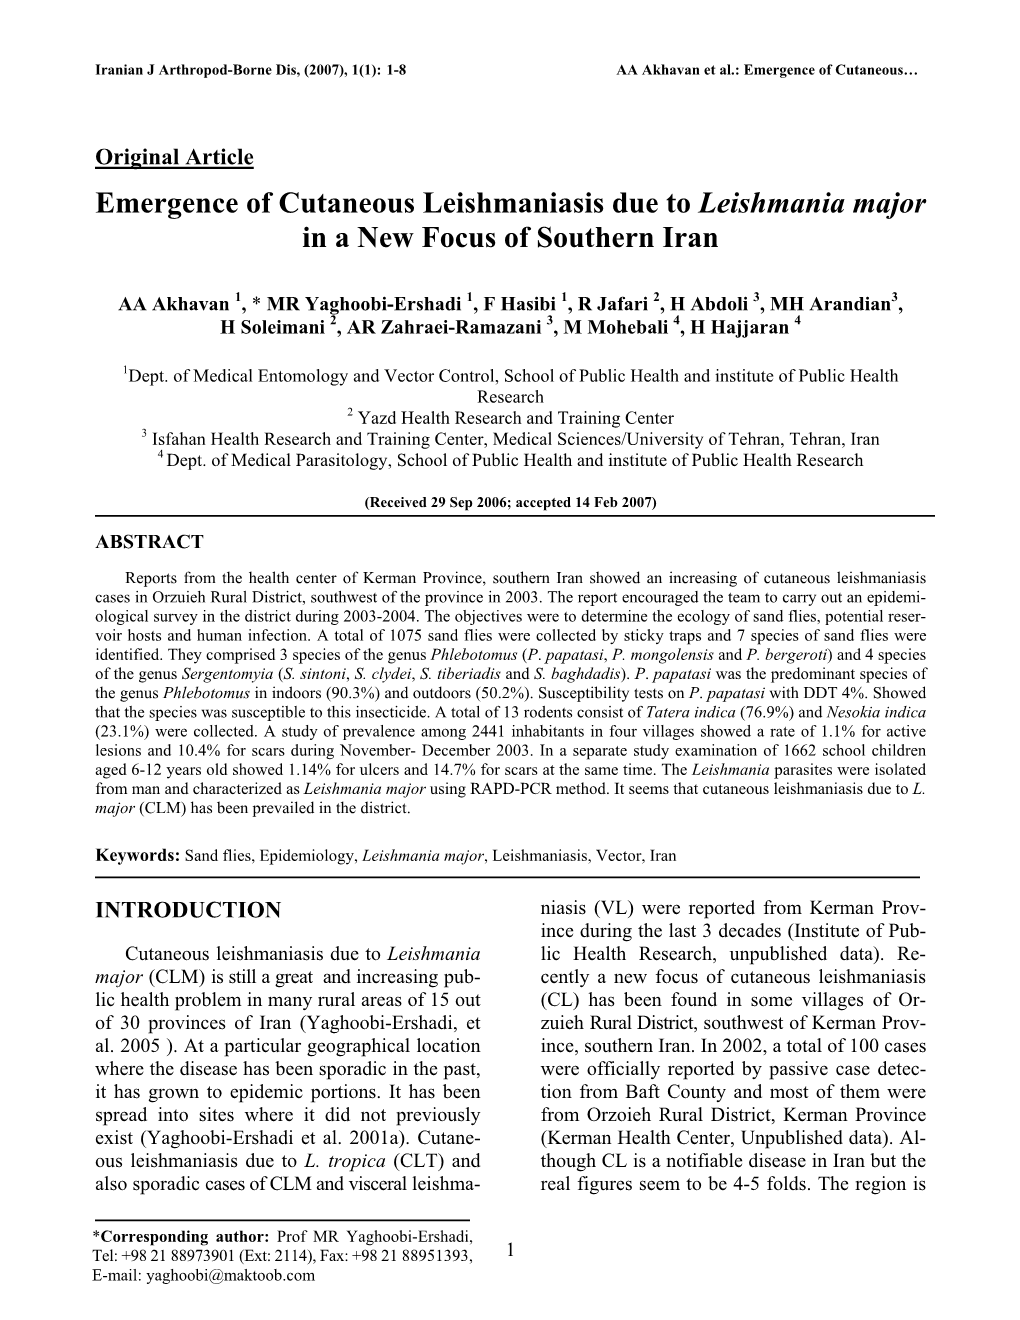 Emergence of Cutaneous Leishmaniasis Due to Leishmania Major in a New Focus of Southern Iran